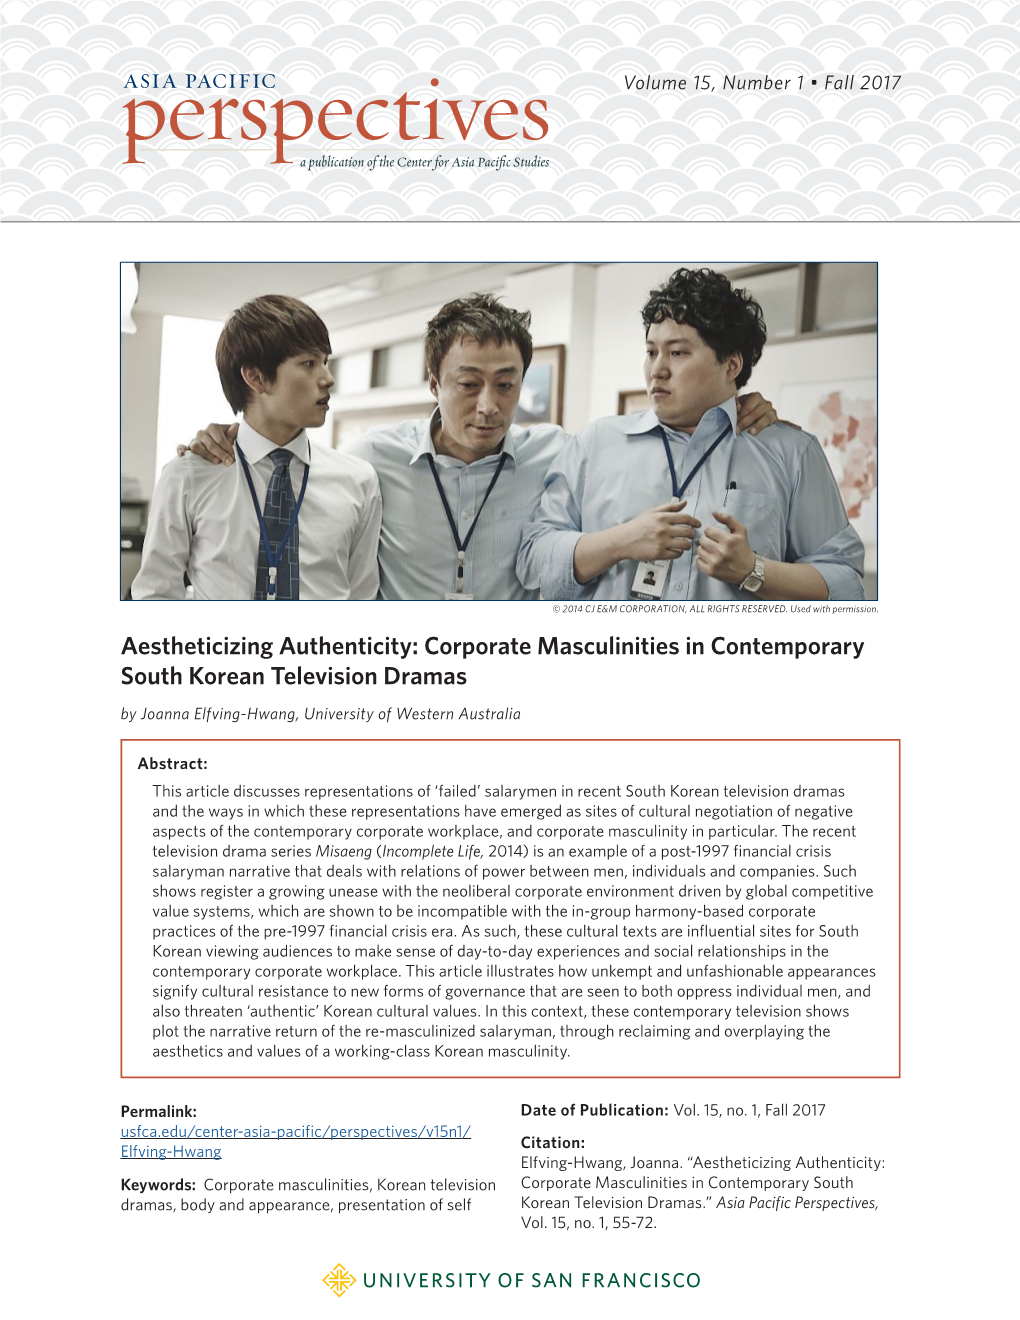 Aestheticizing Authenticity: Corporate Masculinities in Contemporary South Korean Television Dramas by Joanna Elfving-Hwang, University of Western Australia